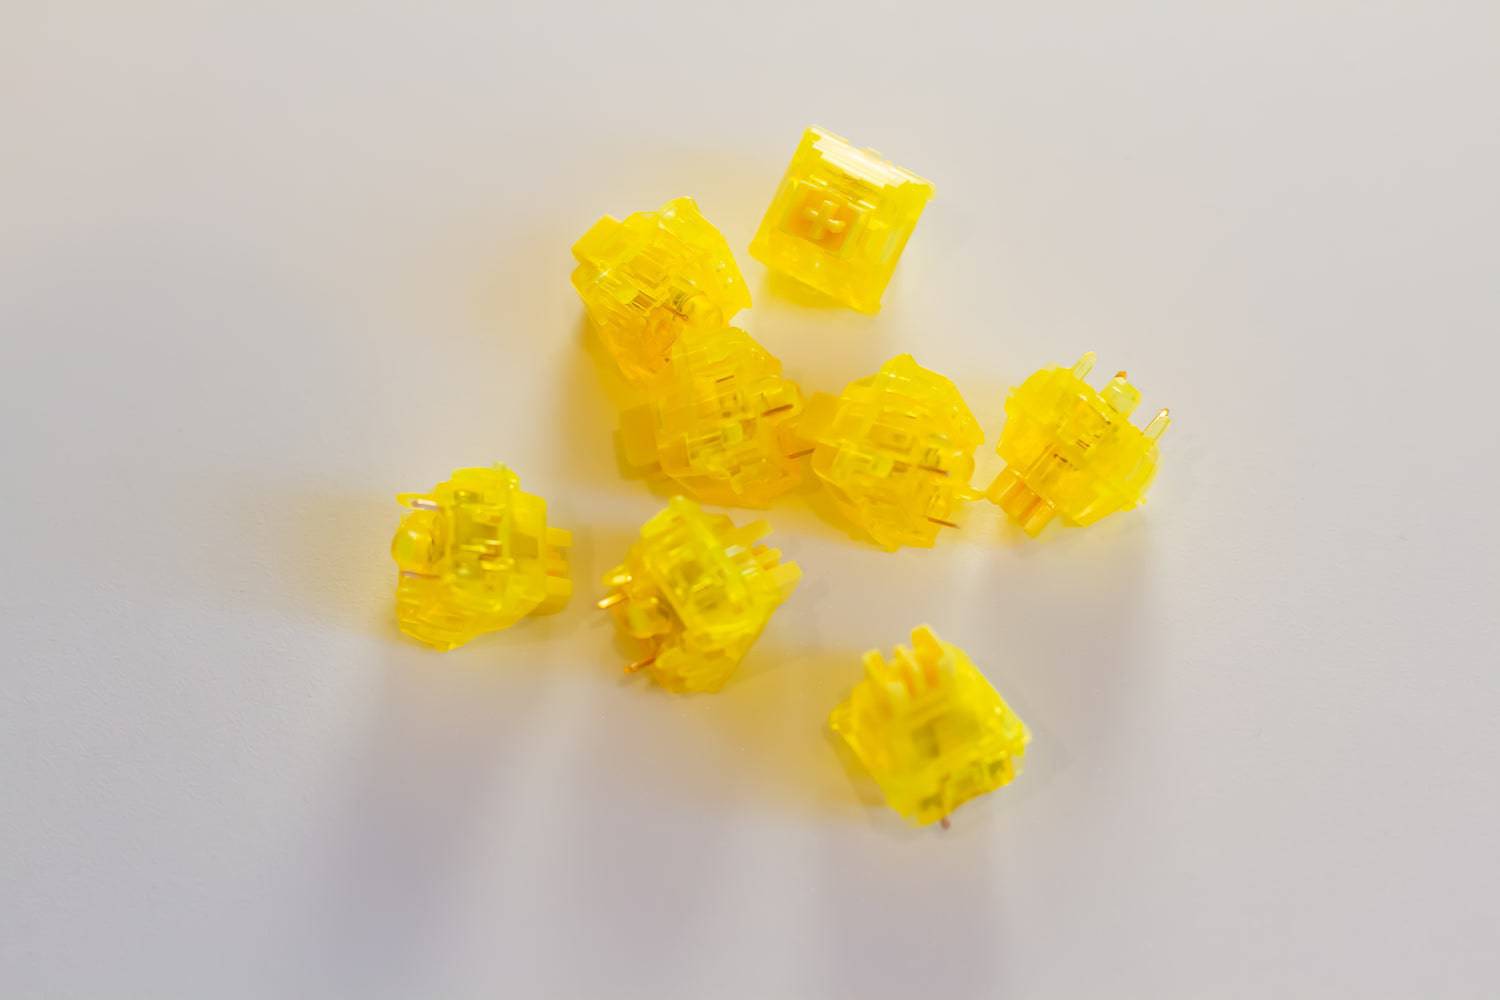 Yellow Inks from the premium line of gateron switches, great for the balanced linear